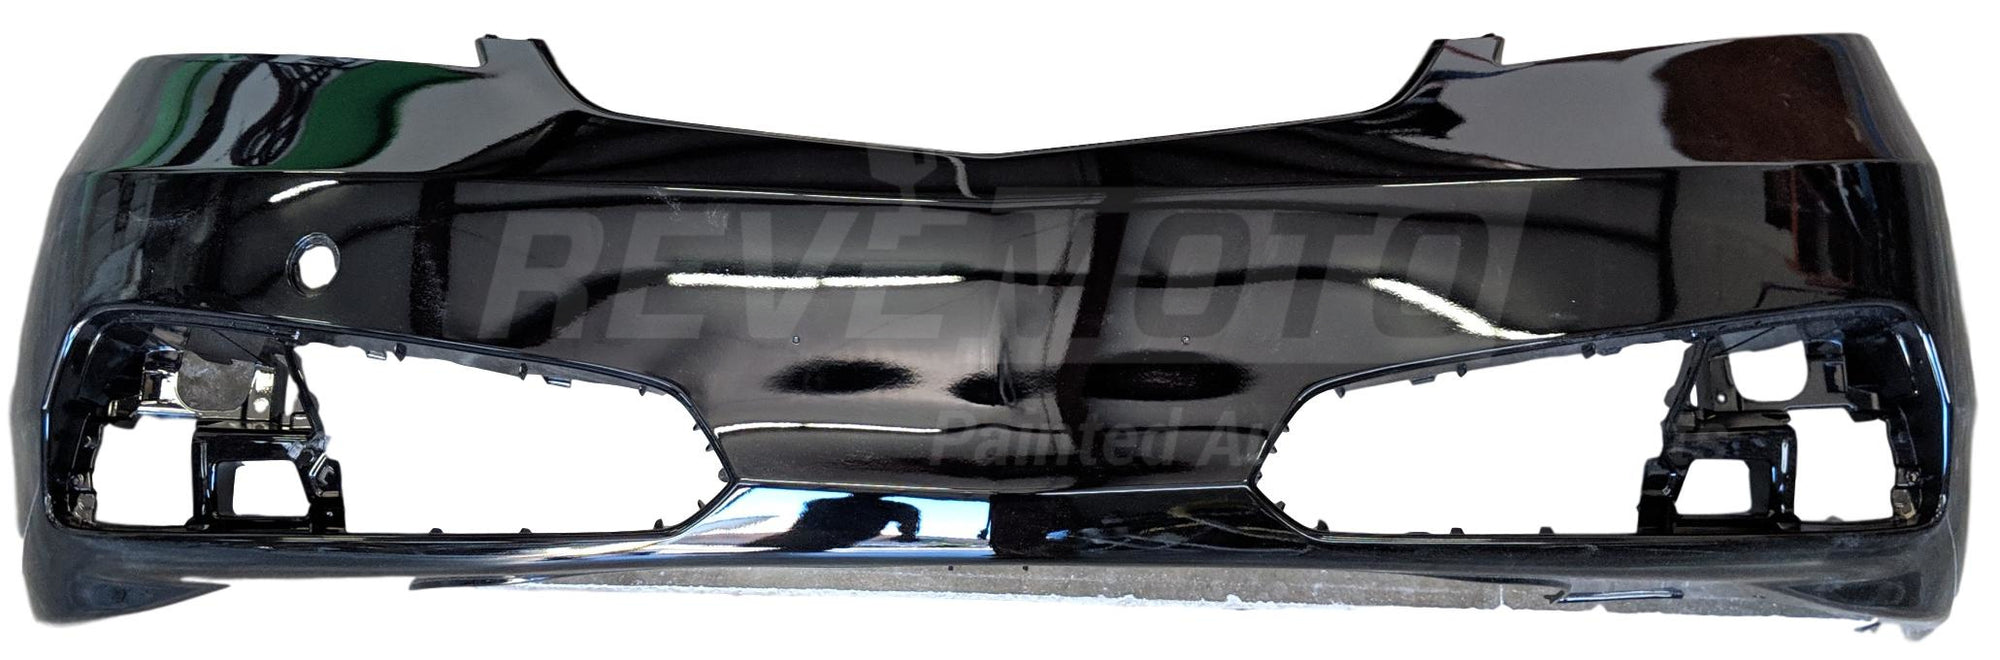 2012 Acura TL : Front Bumper Painted